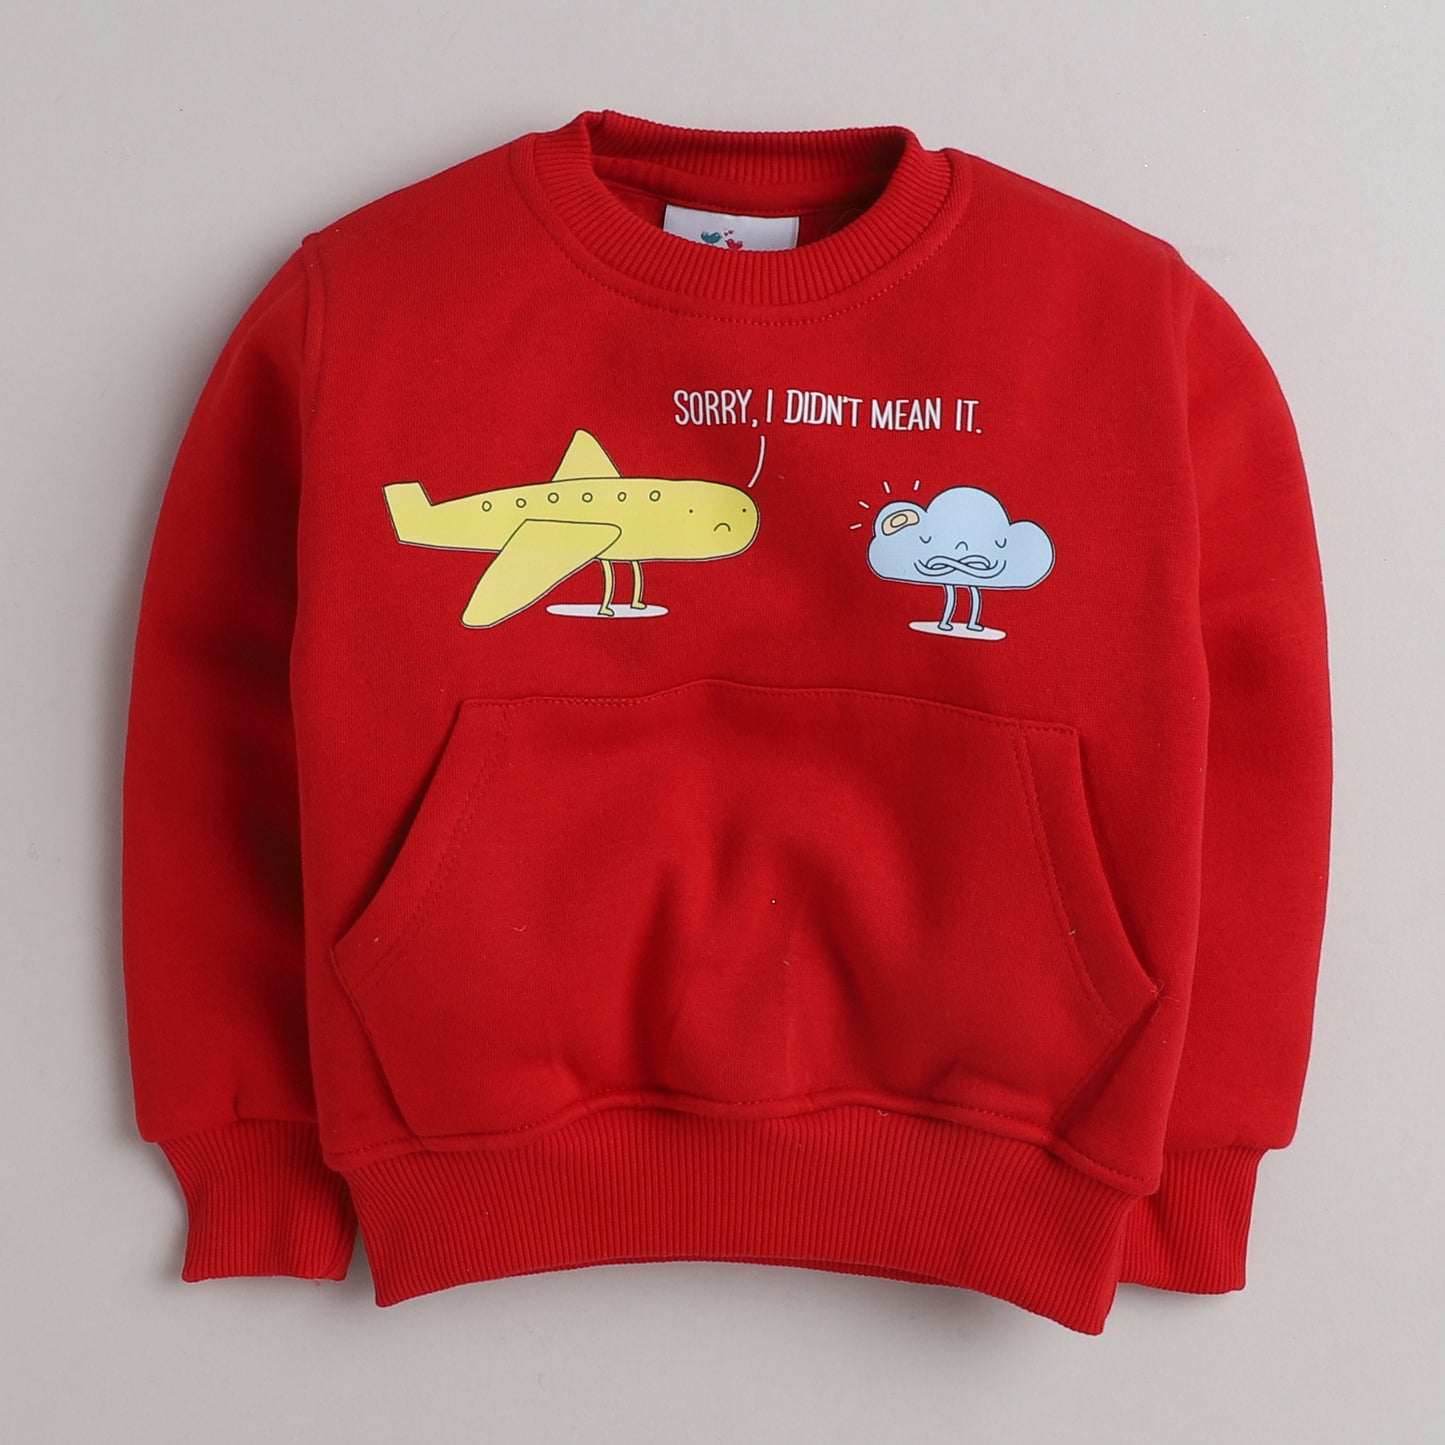 Knitting Doodles Fleece Kid's Red Round Neck Cloud and Aeroplane Print Jogger Set-Red